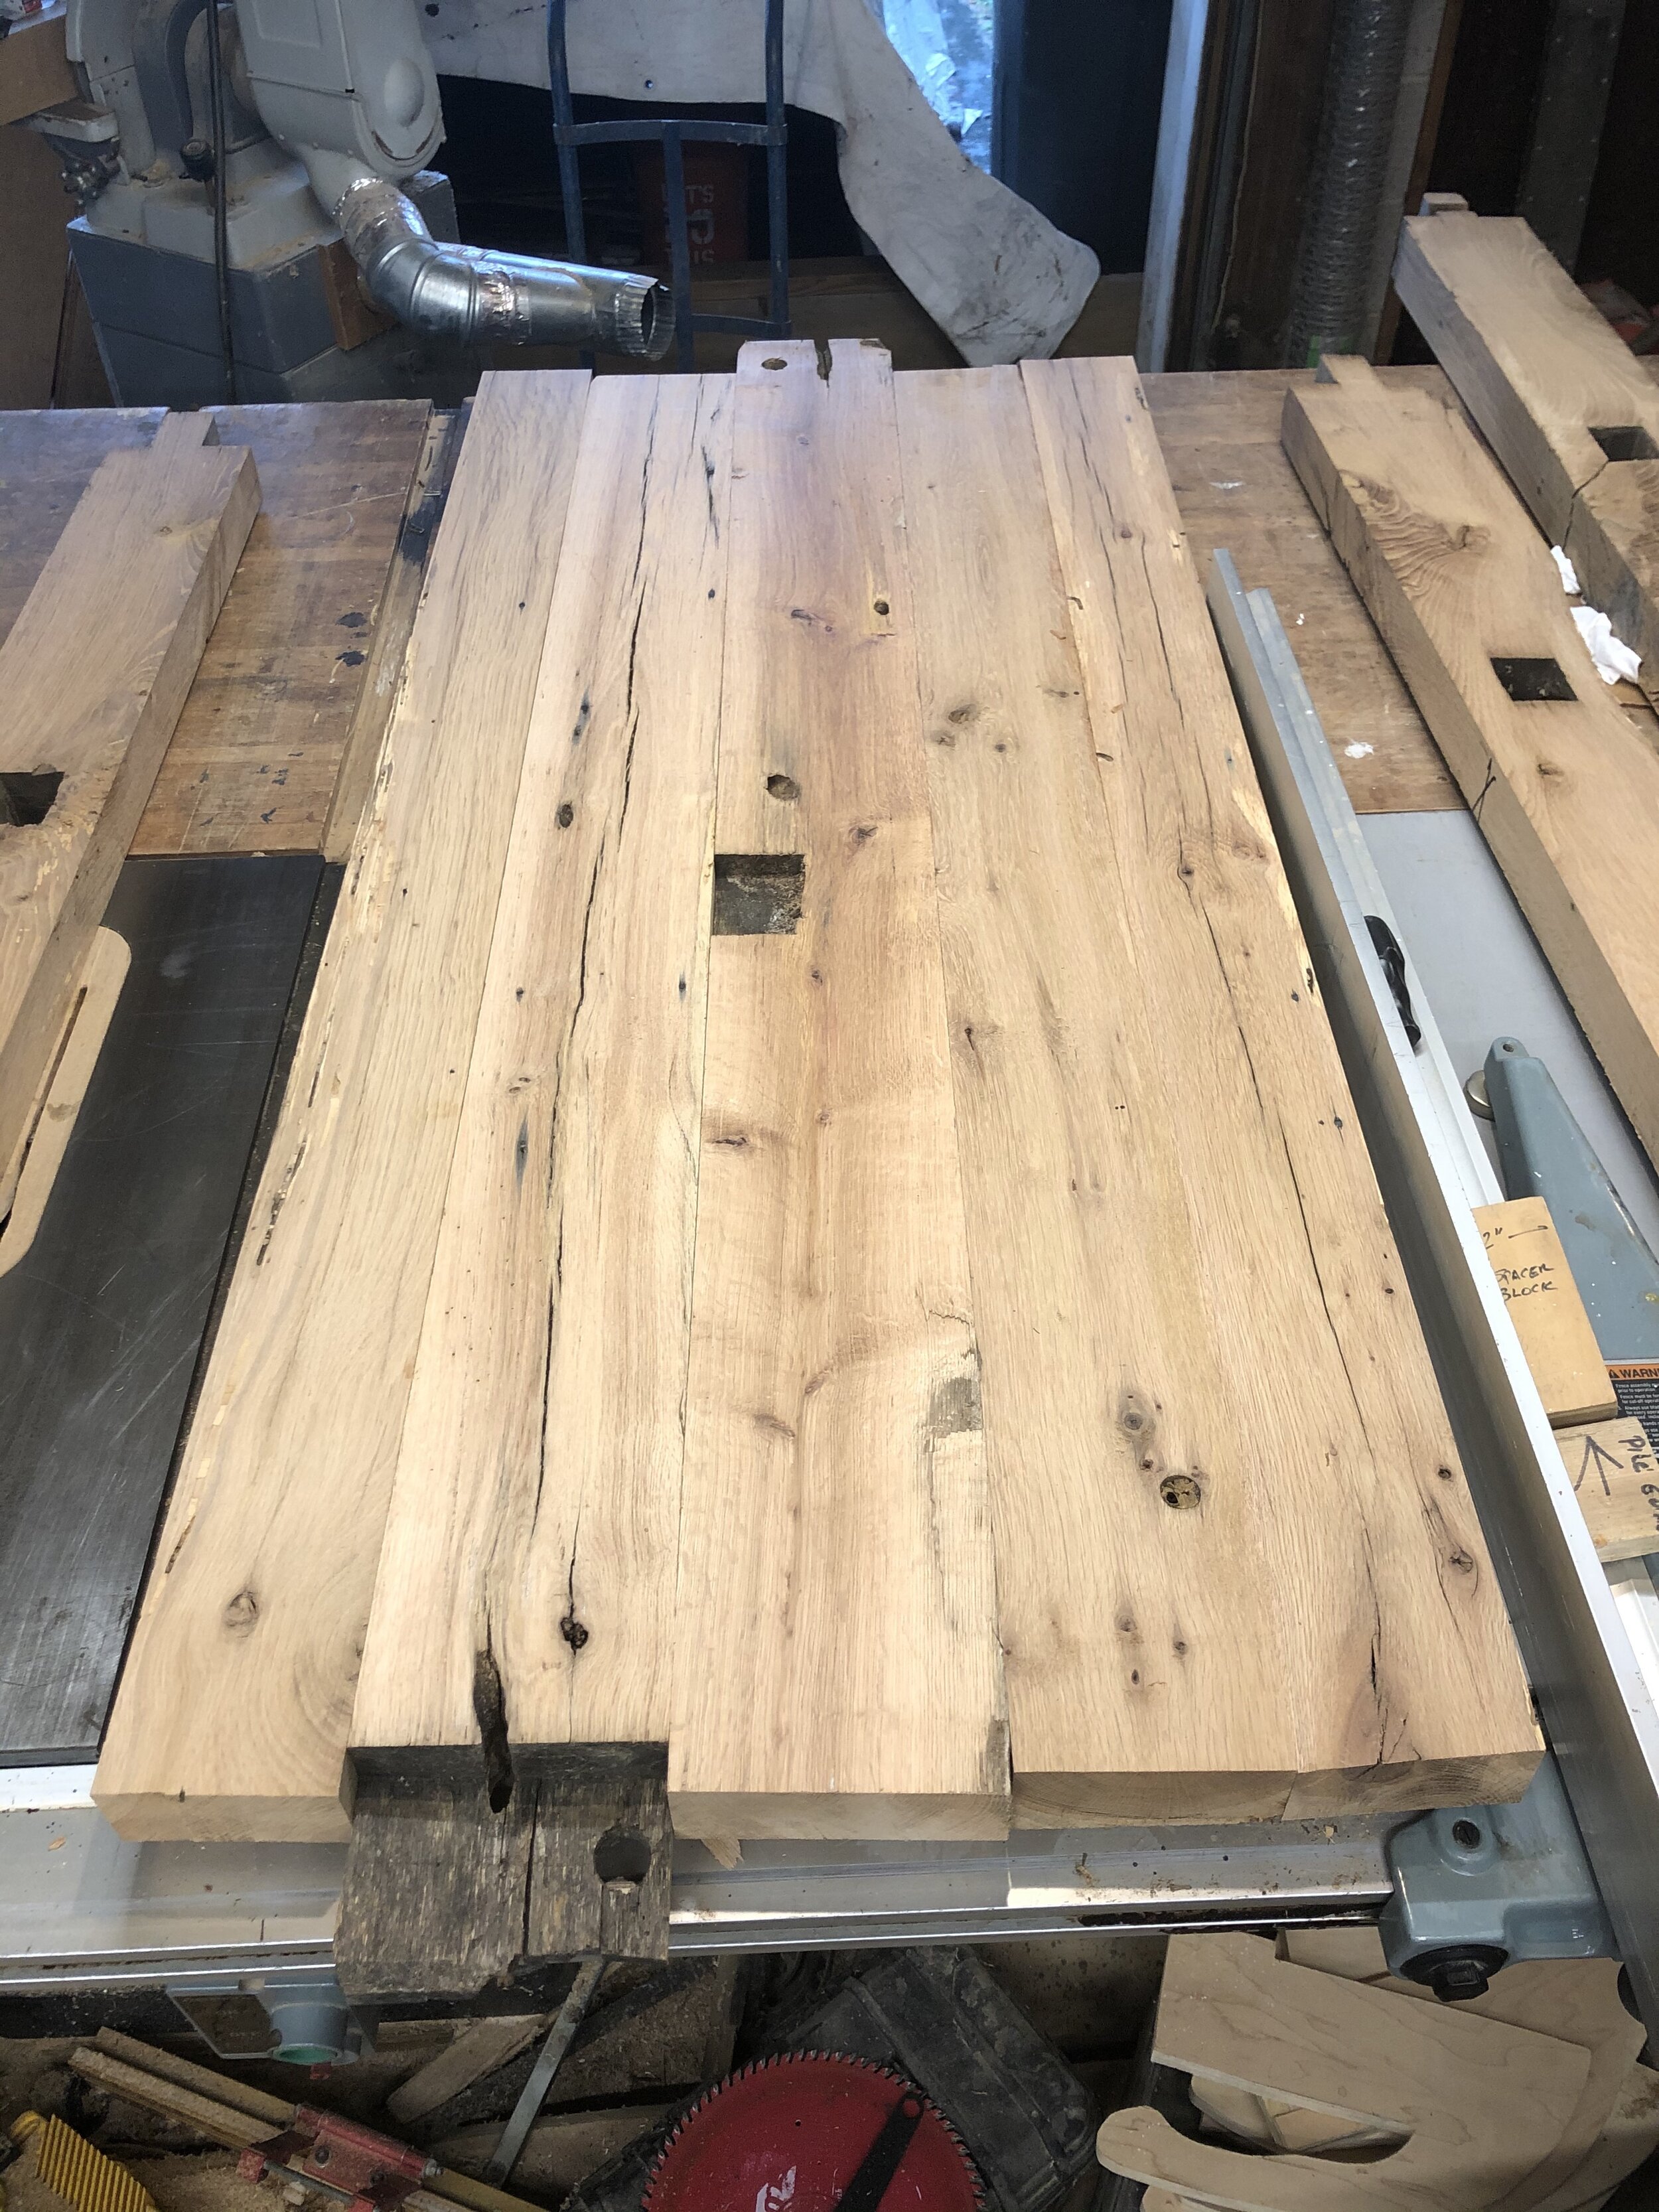  I began by milling several of the beams I had at my shop and then arranging the boards for the new countertops. The clients wanted to highlight the mortise pockets in the wood from the original beams, so I tried several different arrangements of the